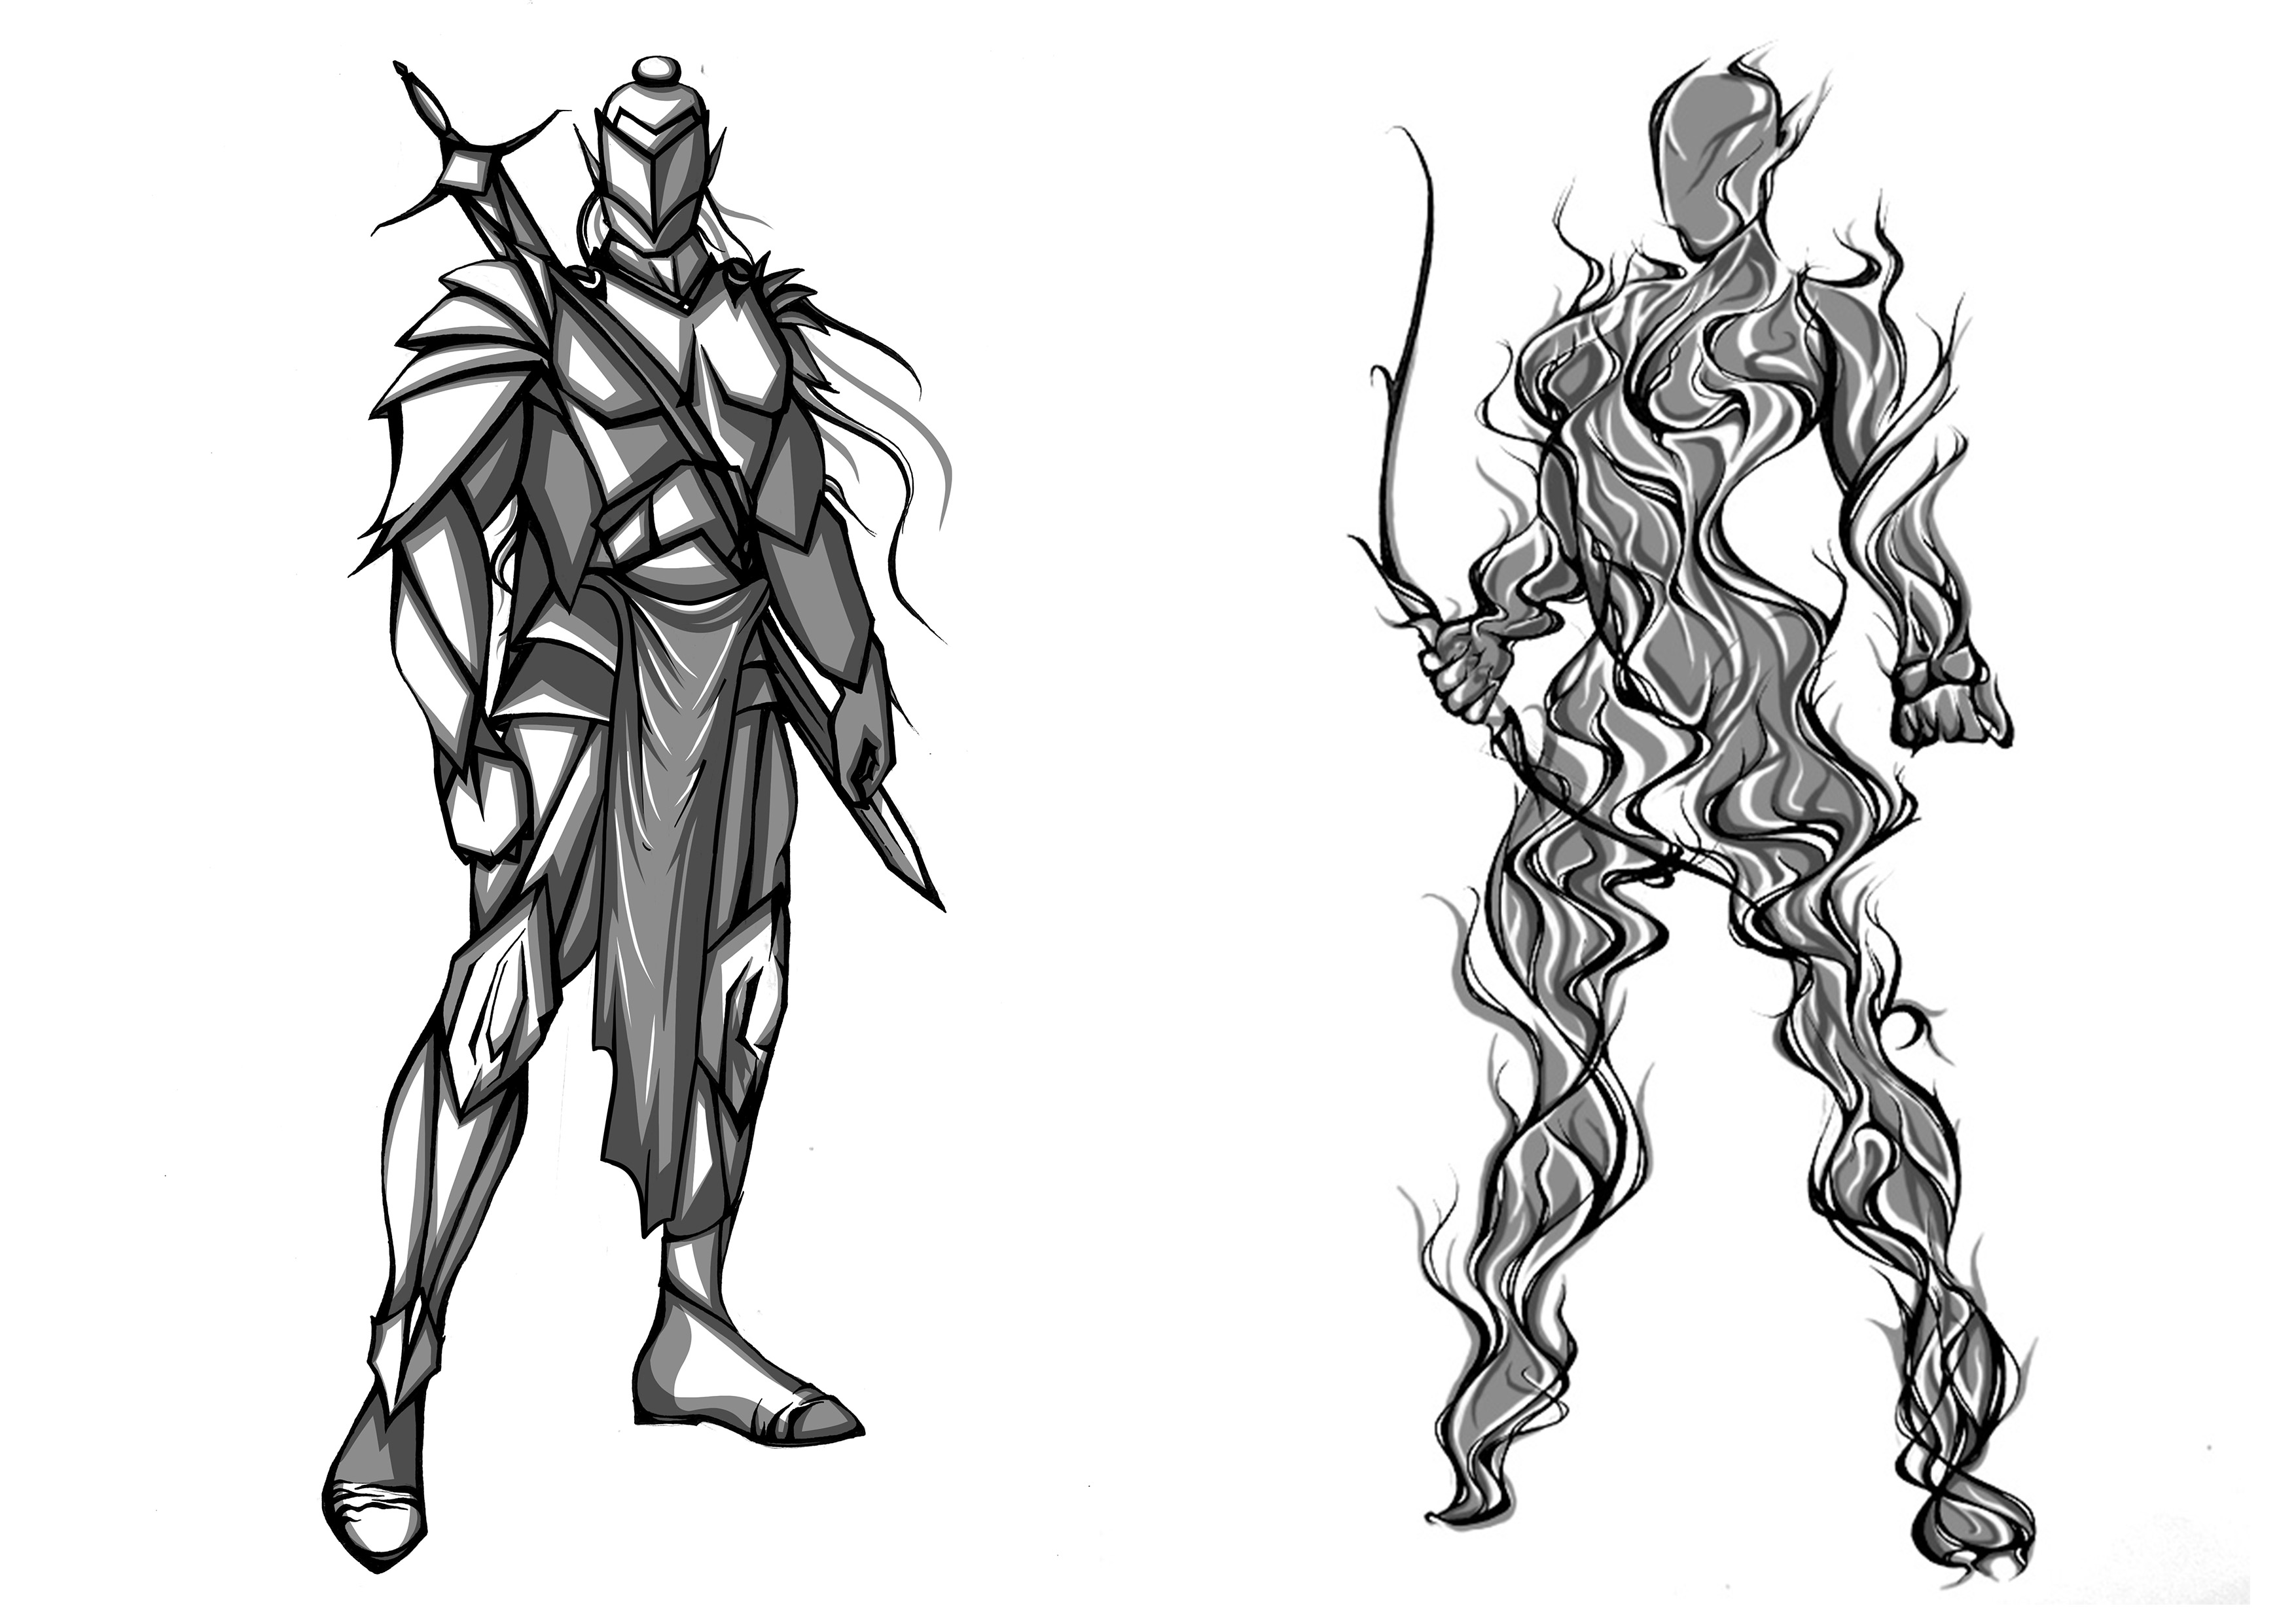 Traditionally drawn, finished digitally., character designs of the warrior of good/light (Rivion), and the creator of ether (Vela). Series inspired by natural elements.